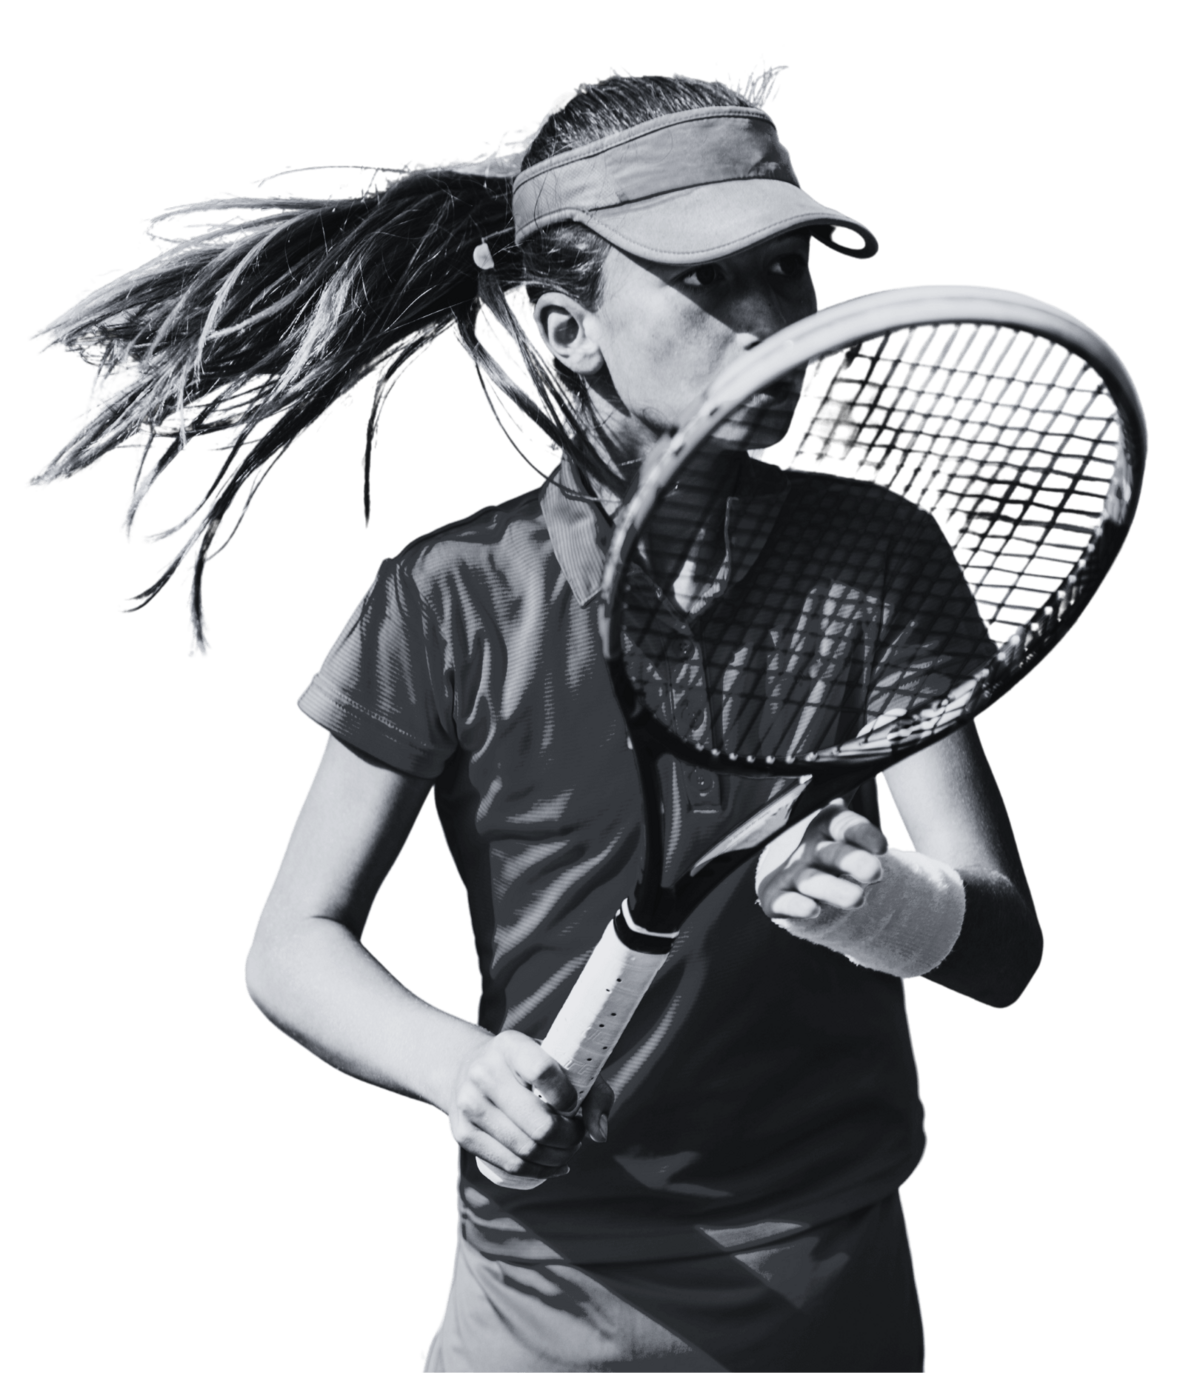 youth tennis girl swinging a racket